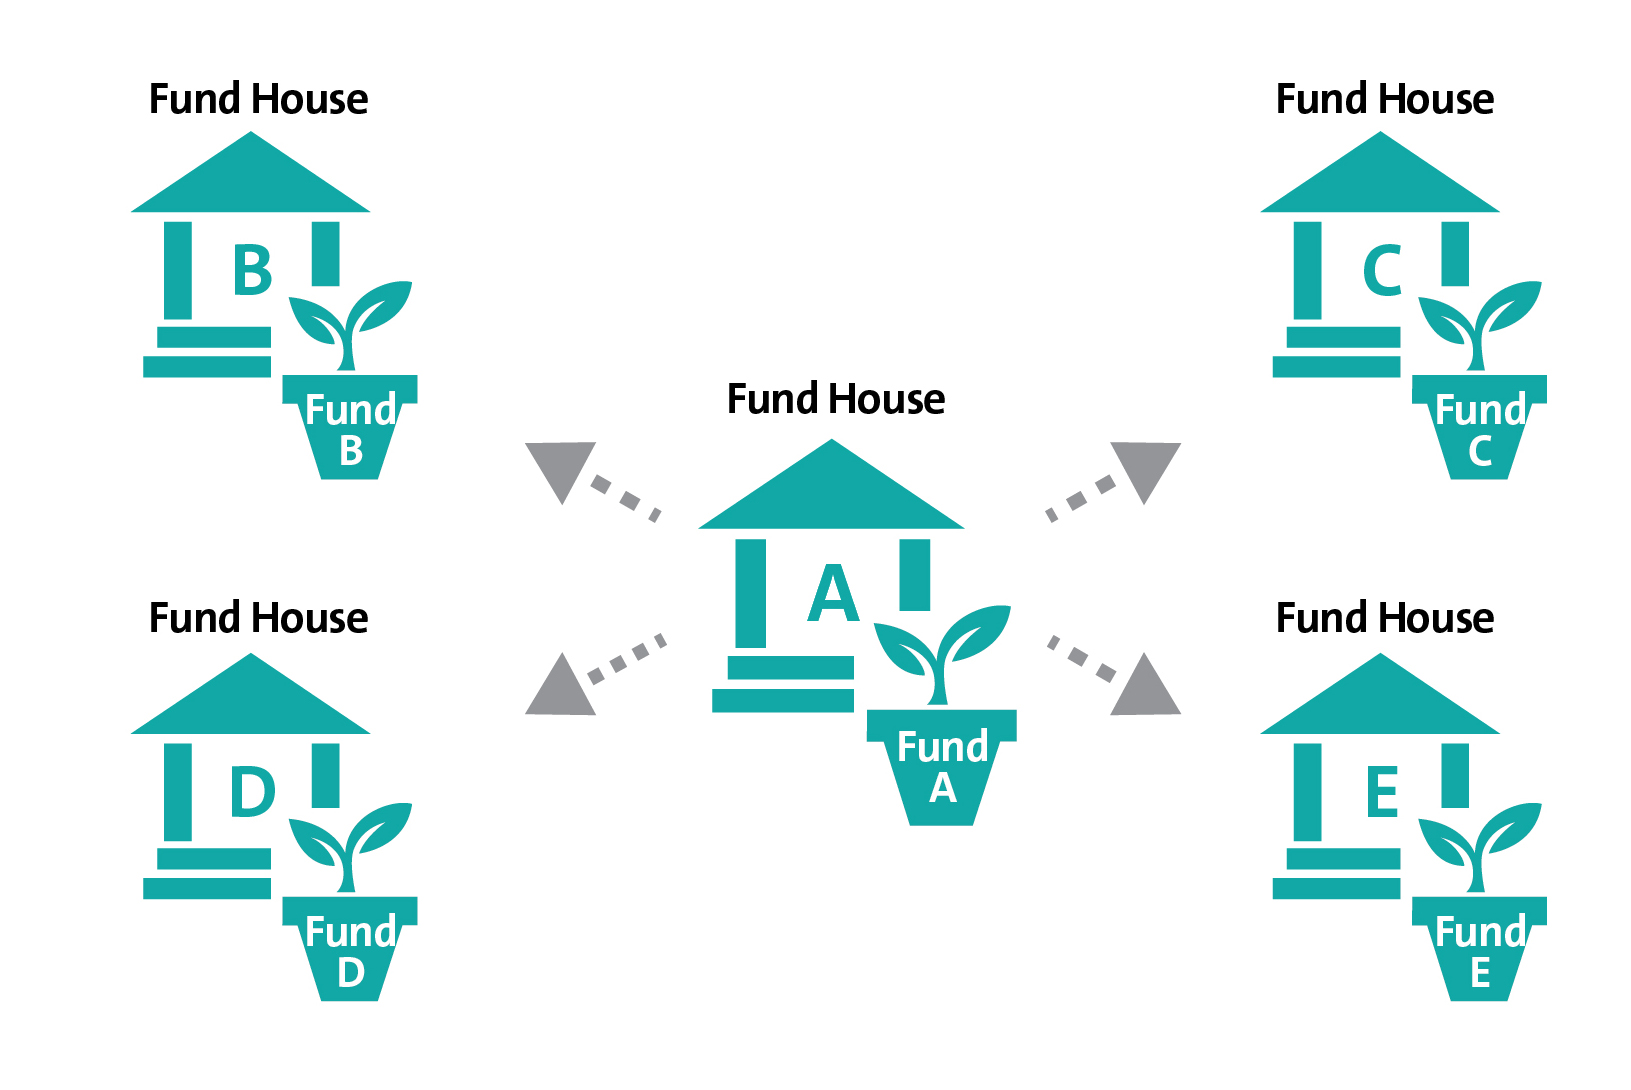 Switch fund A of fund house A to other funds B, C, D, E of fund houses B, C, D, E